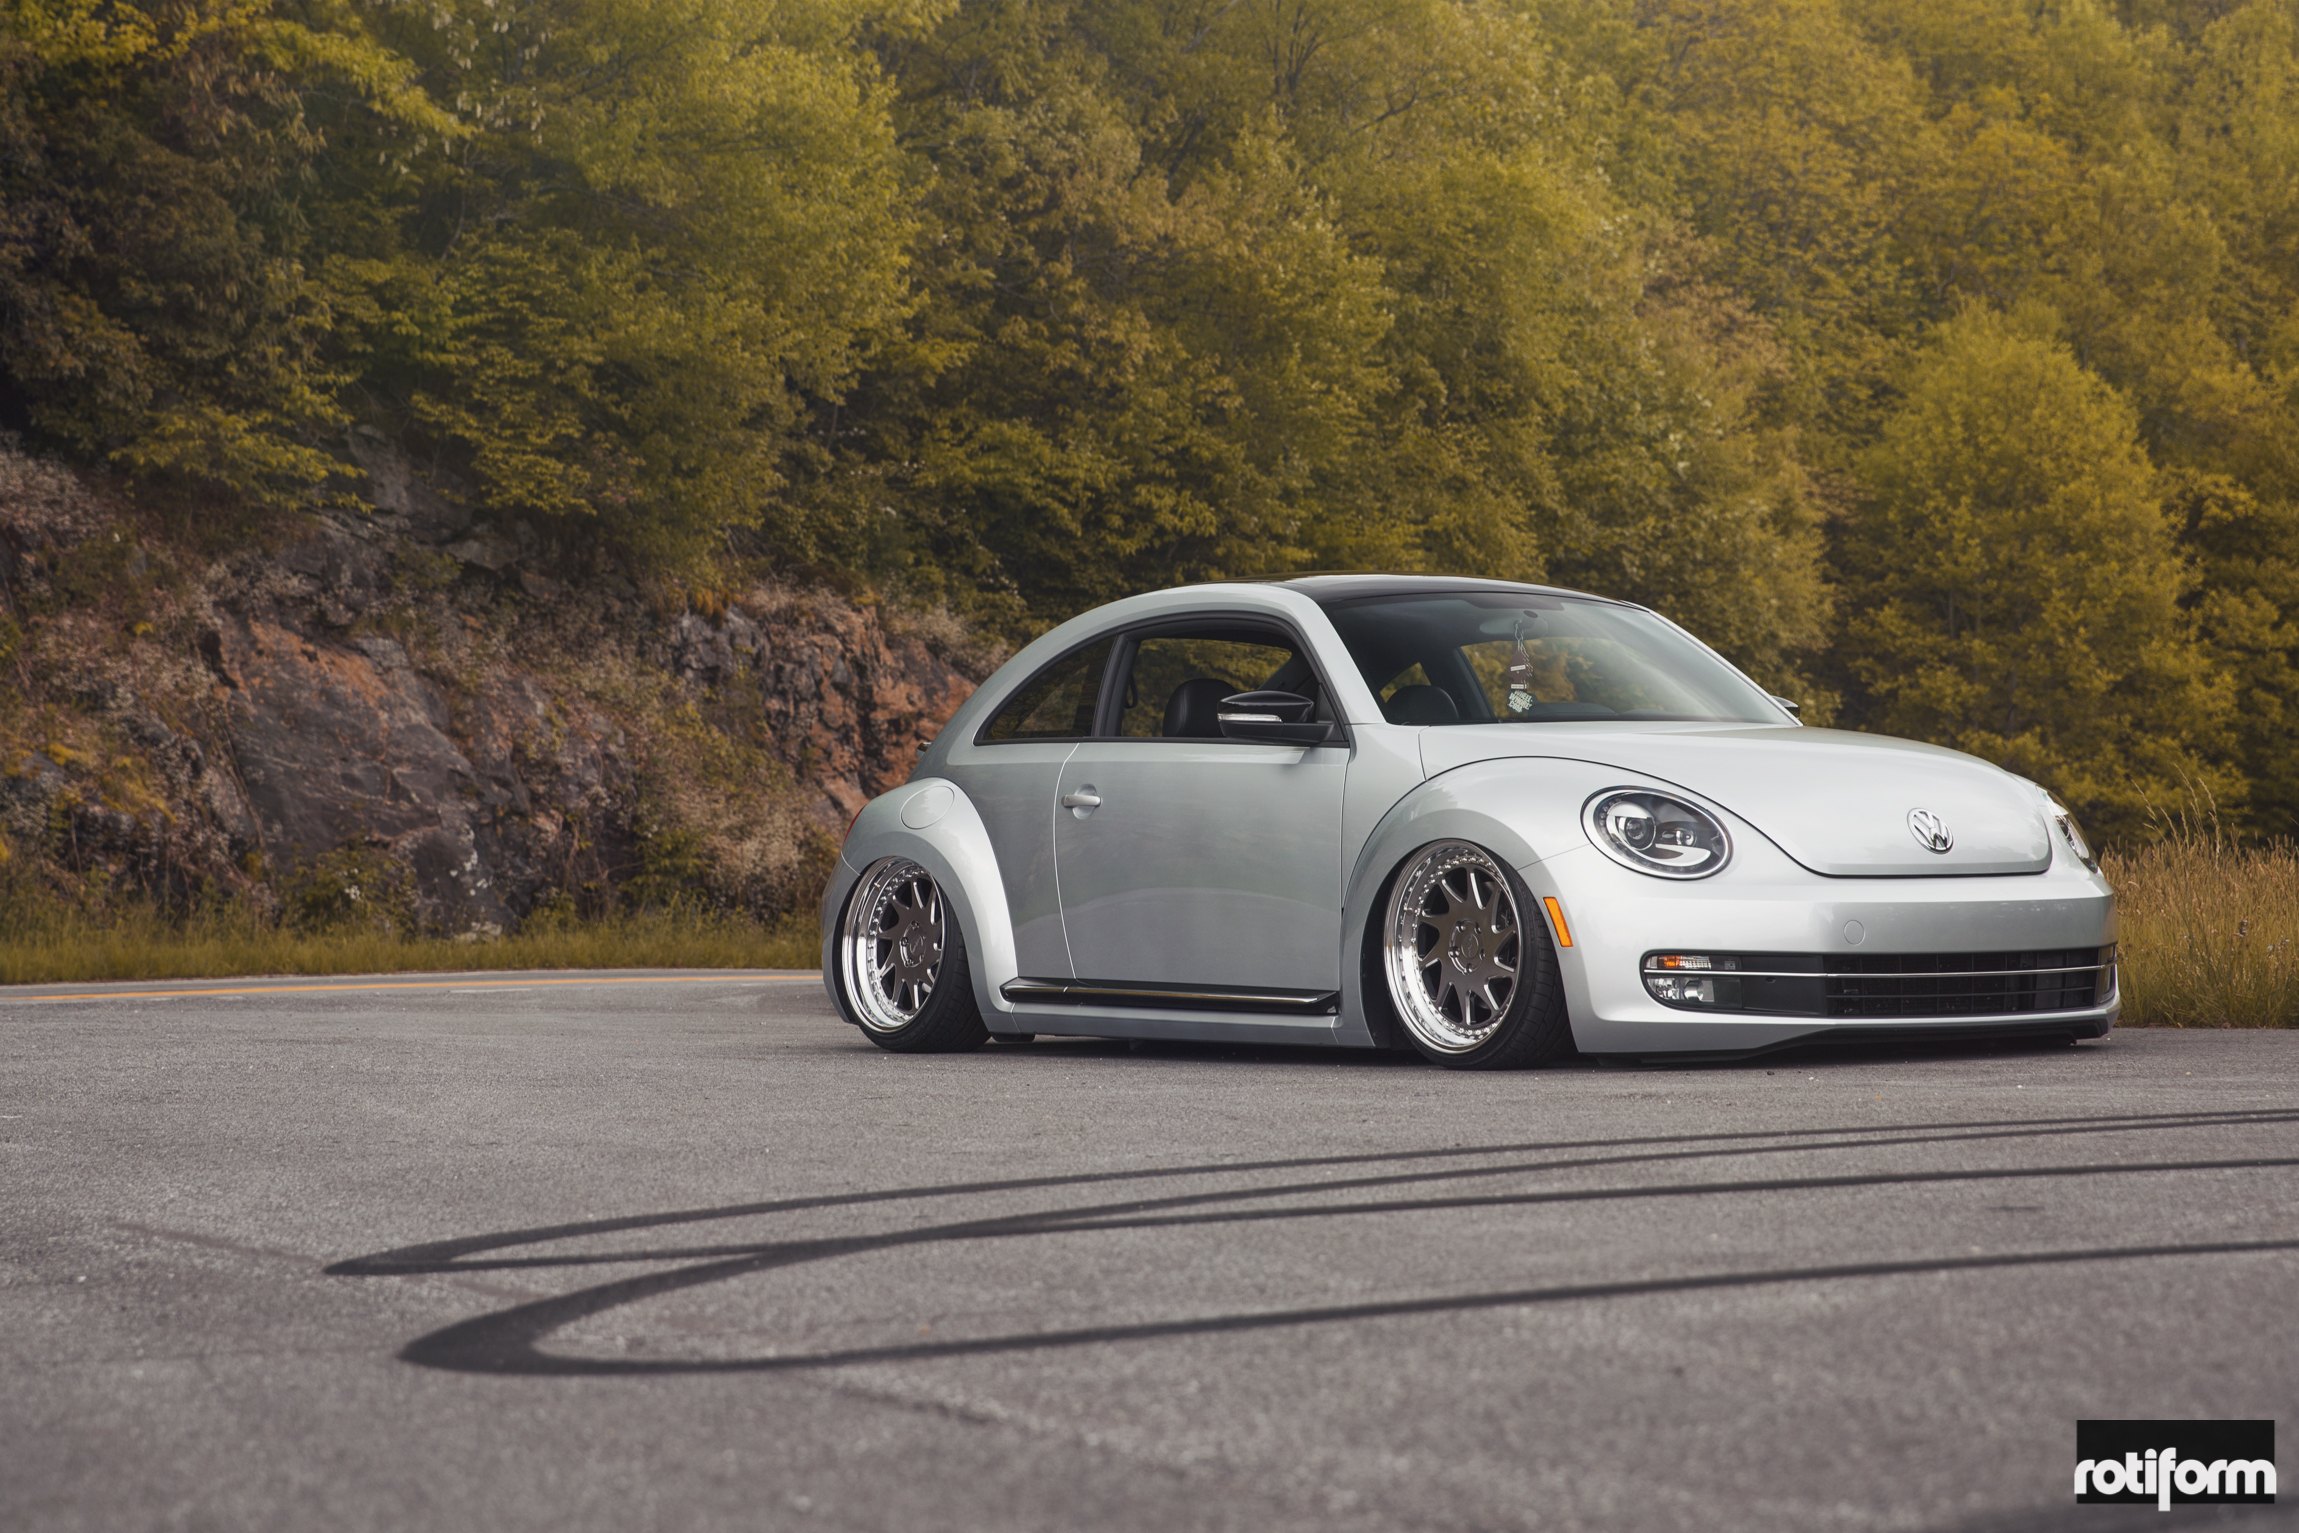 Silver Stanced VW Beetle with Aftermarket Front Bumper - Photo by Rotiform